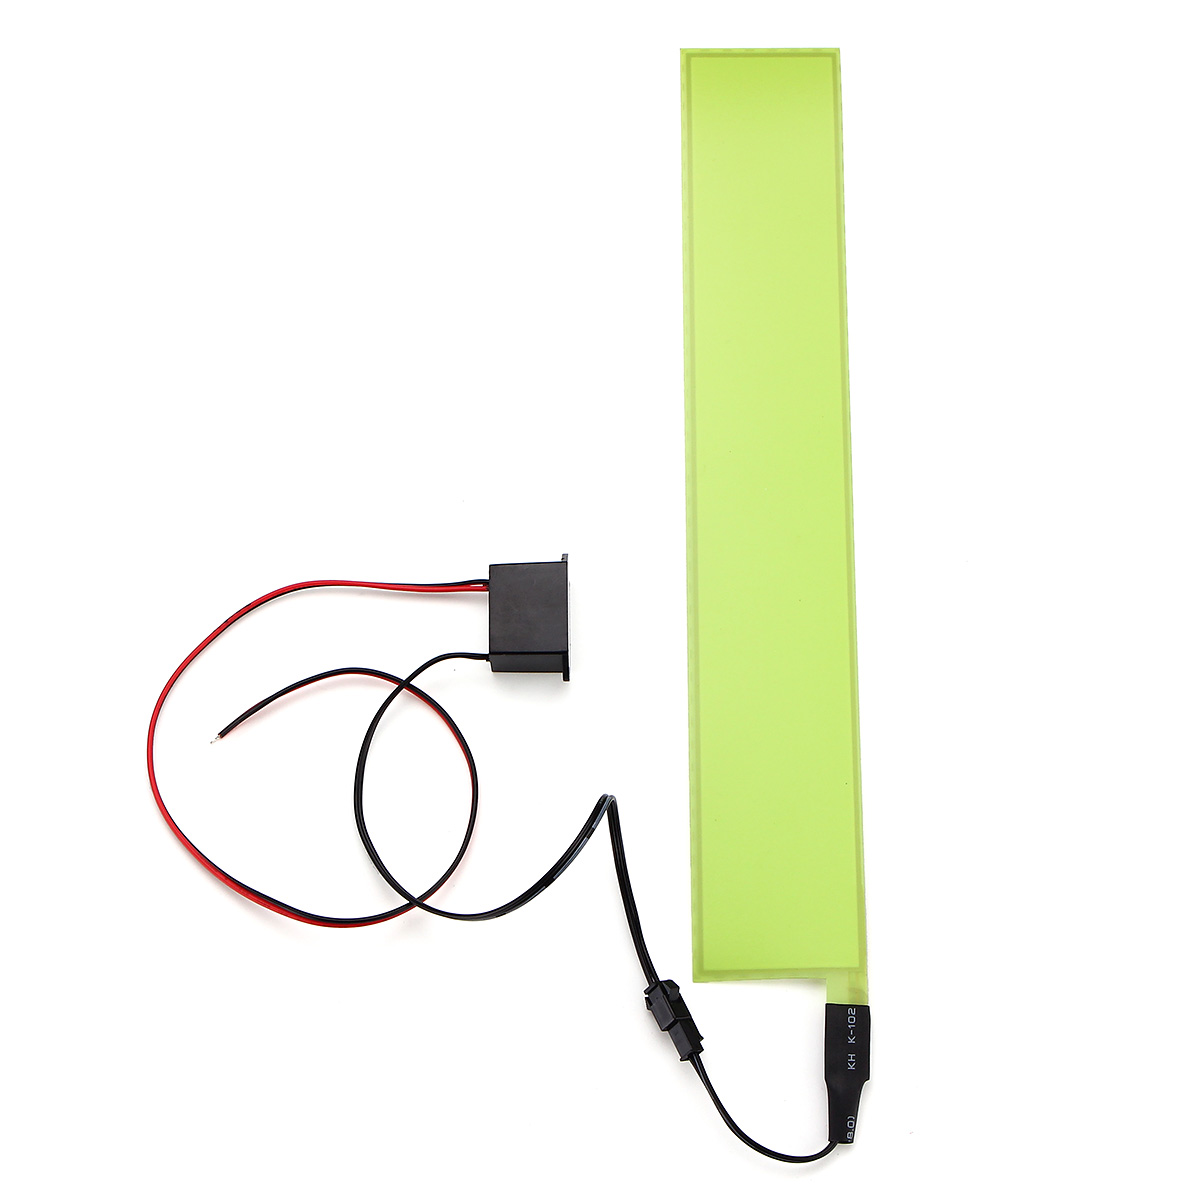 12x2-Inch-12V-Flexible-Electroluminescent-Tape-EL-Panel-Backlight-Decorations-Light-with-Inverter-1114097